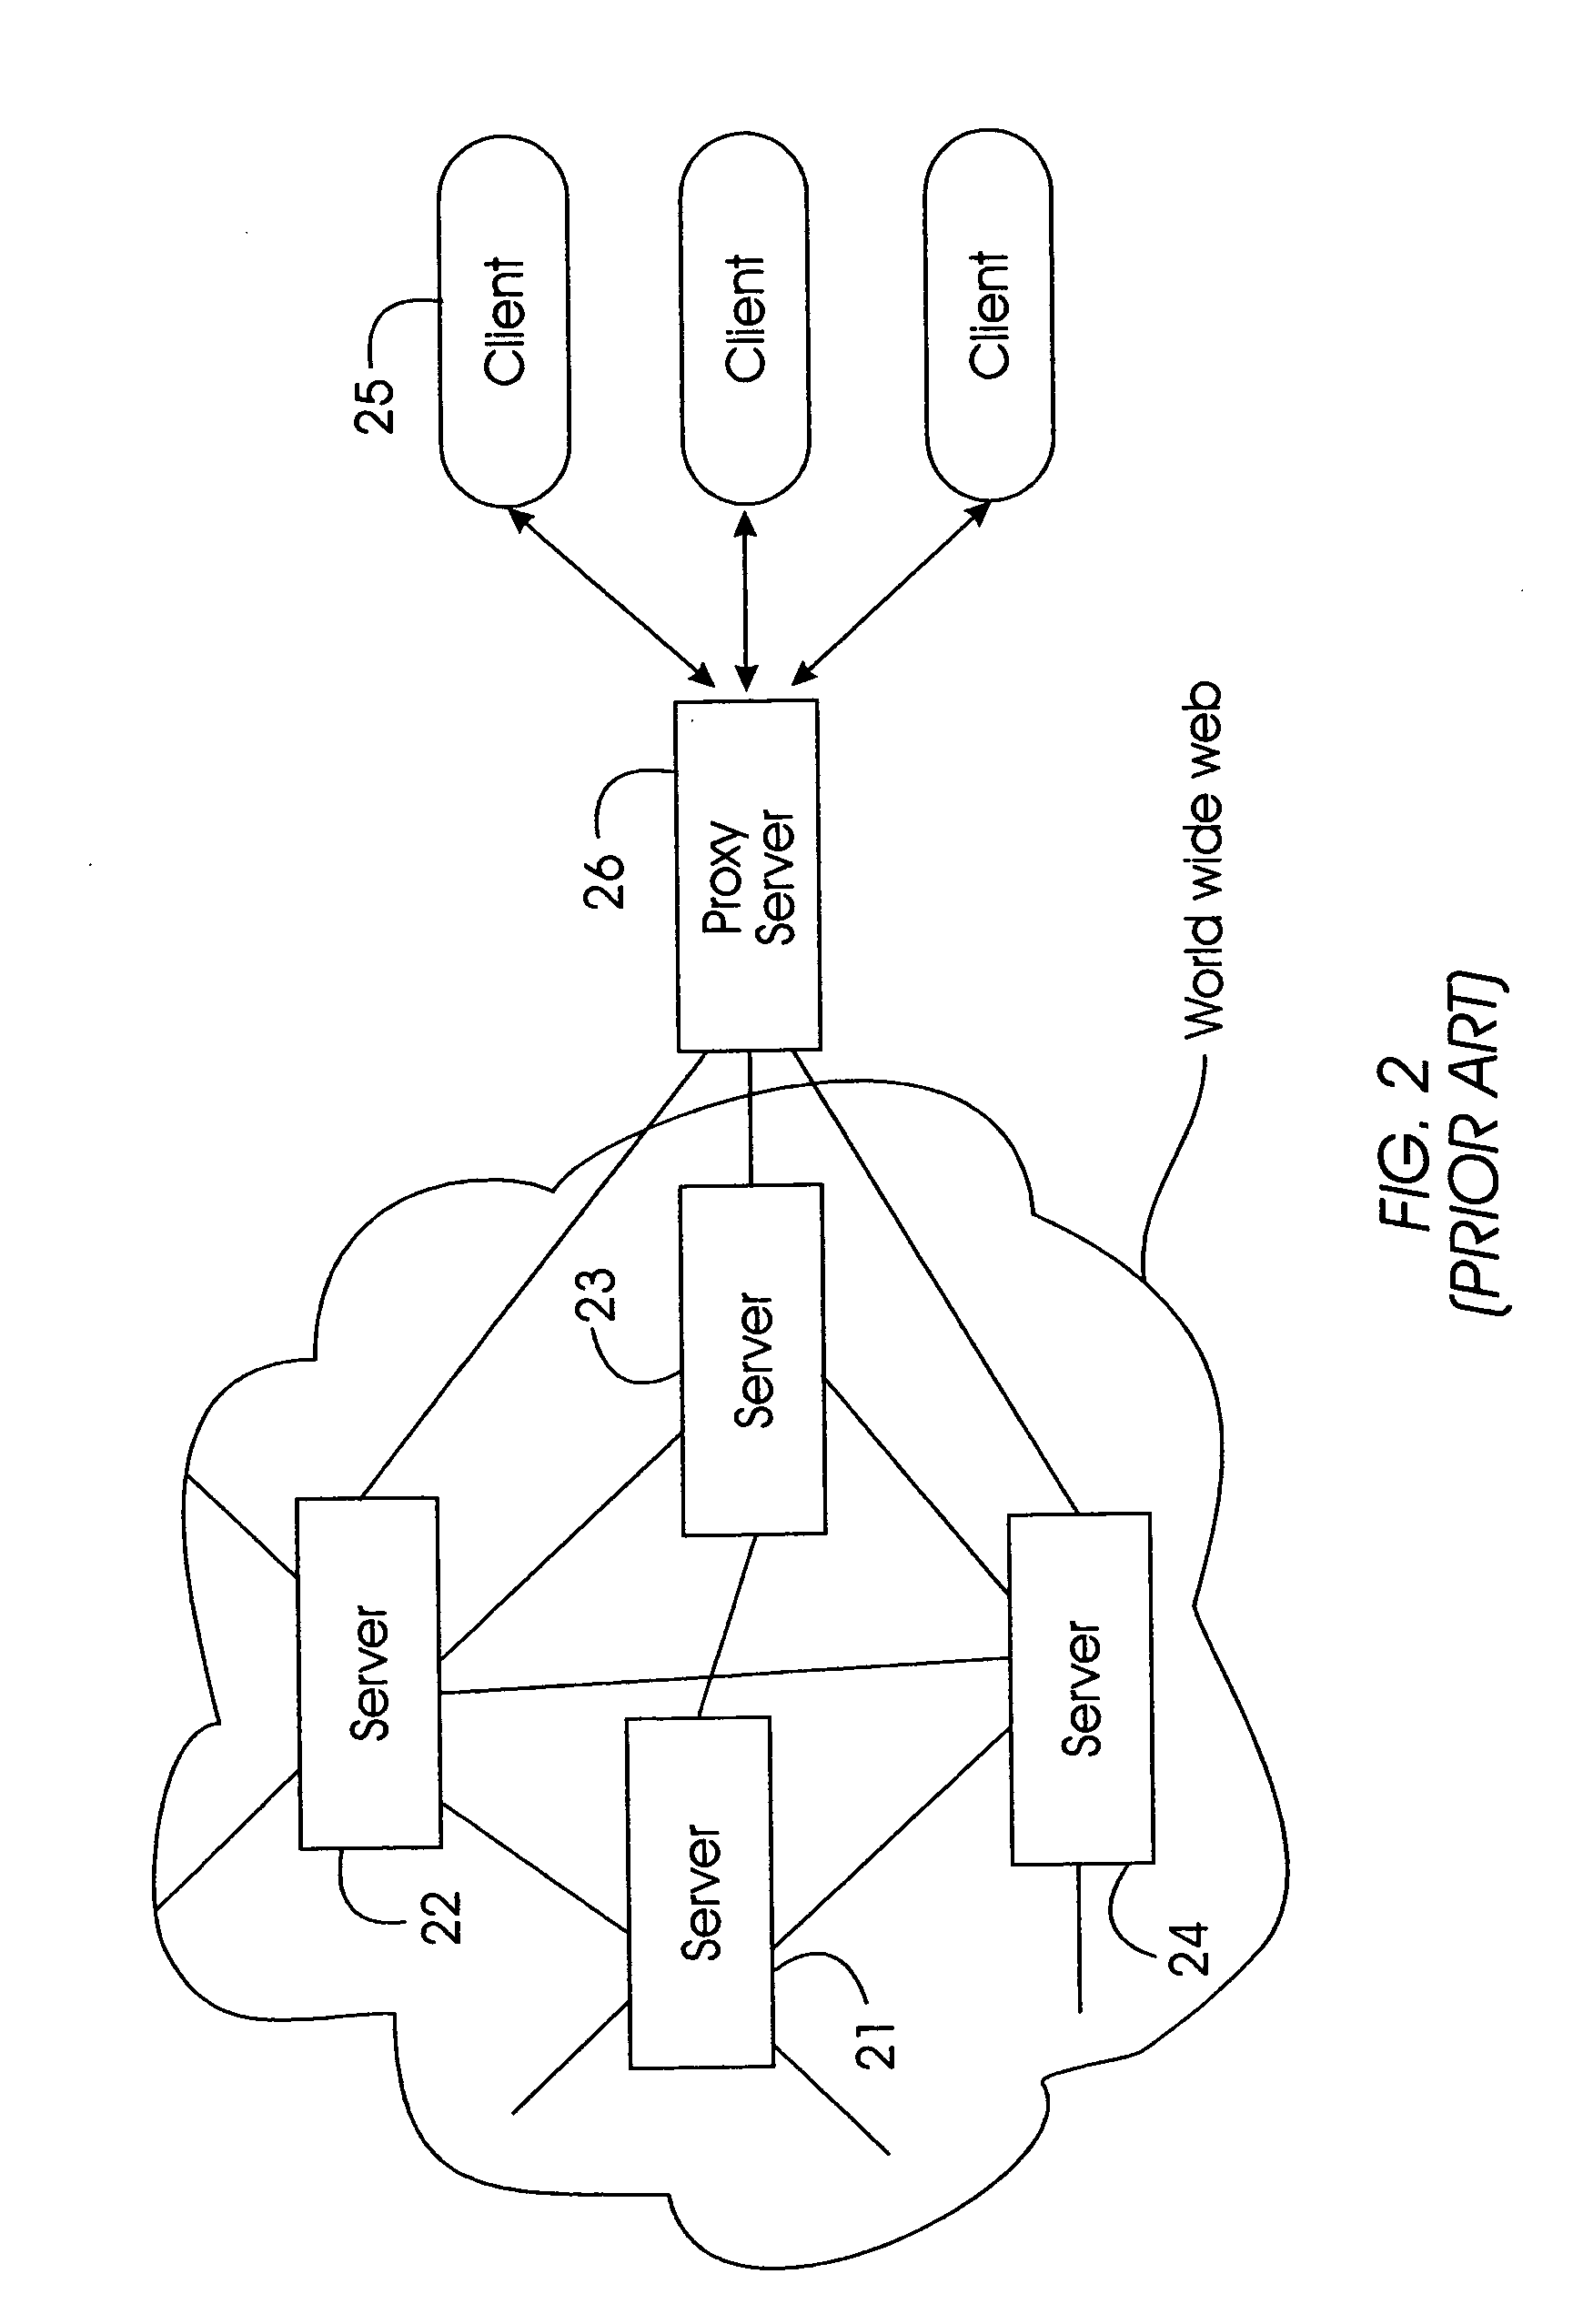 Client-server computing system capable of validating cached data based on data transformation